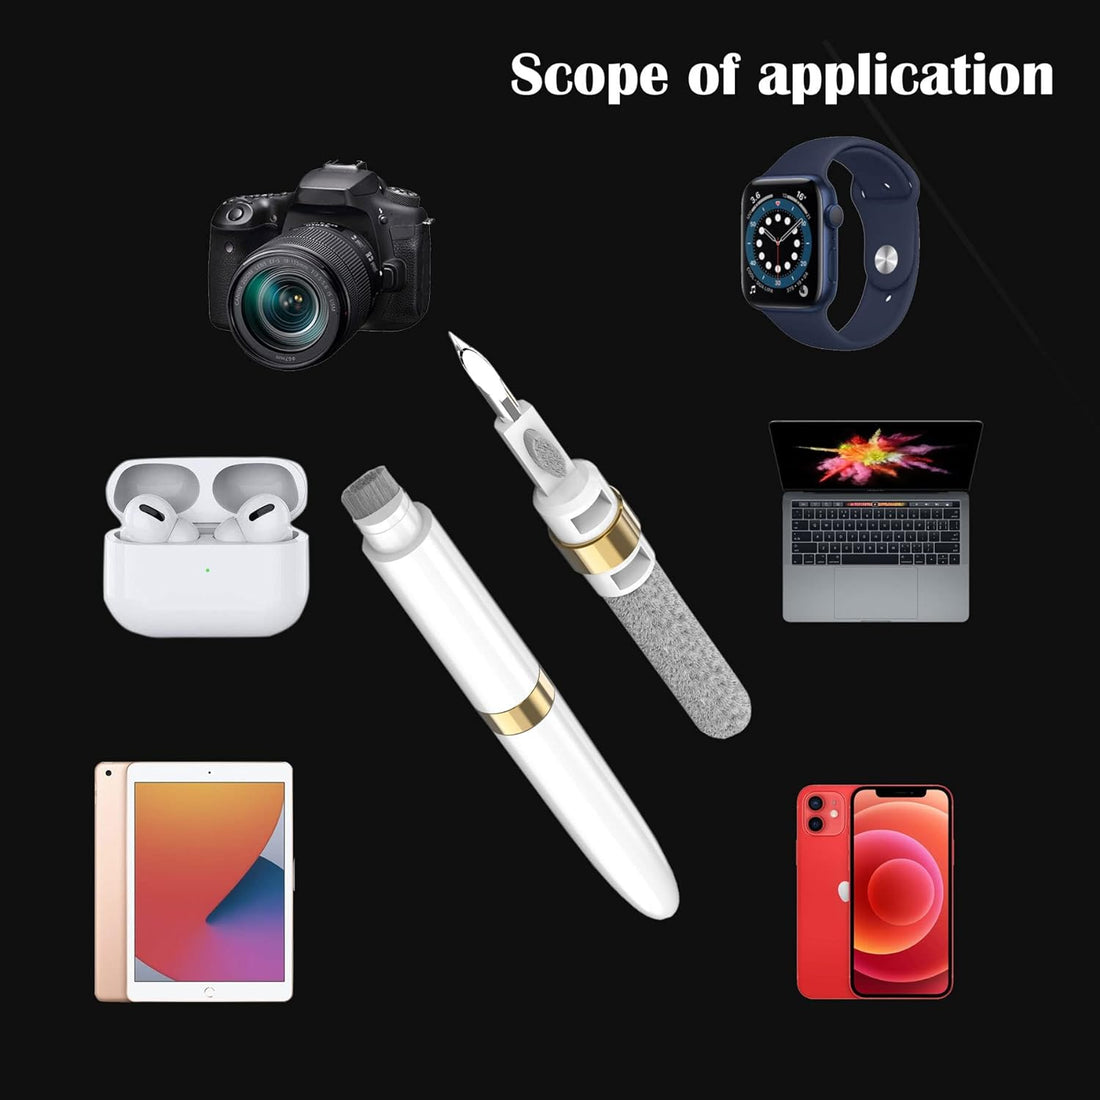 Airport Cleaner Kit，airpods Cleaning kit 4 in 1 Multi-Function Cleaning Pen Set Tool Soft Brush for Airpods Pro 1 2 Wireless Earphones, Airpods Cleaning Tools for Bluetooth Earphones Cleaning Pen